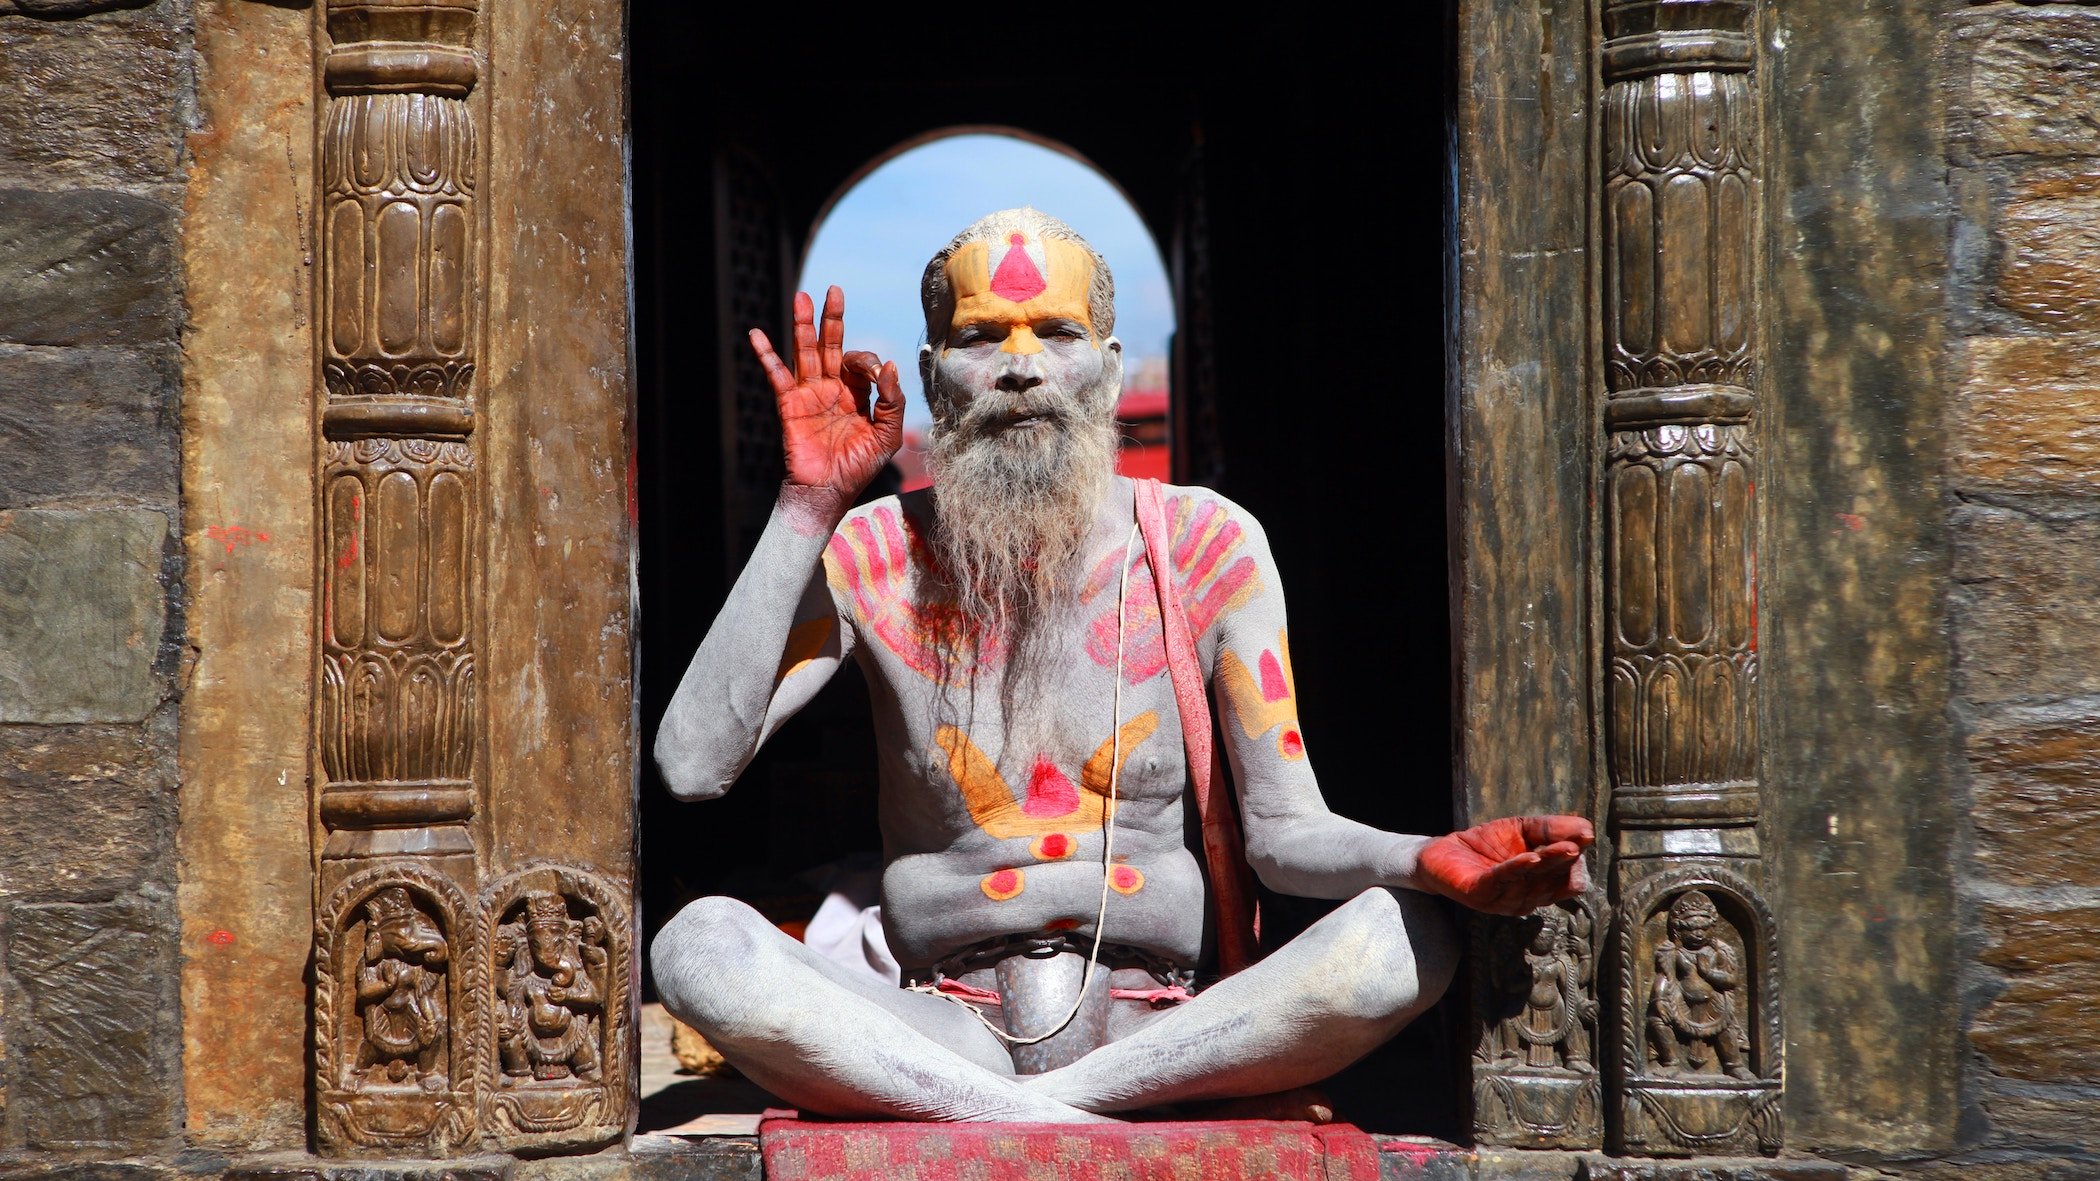 Man covered in body paint meditating in the sun, the fingers on his right hand forming an 